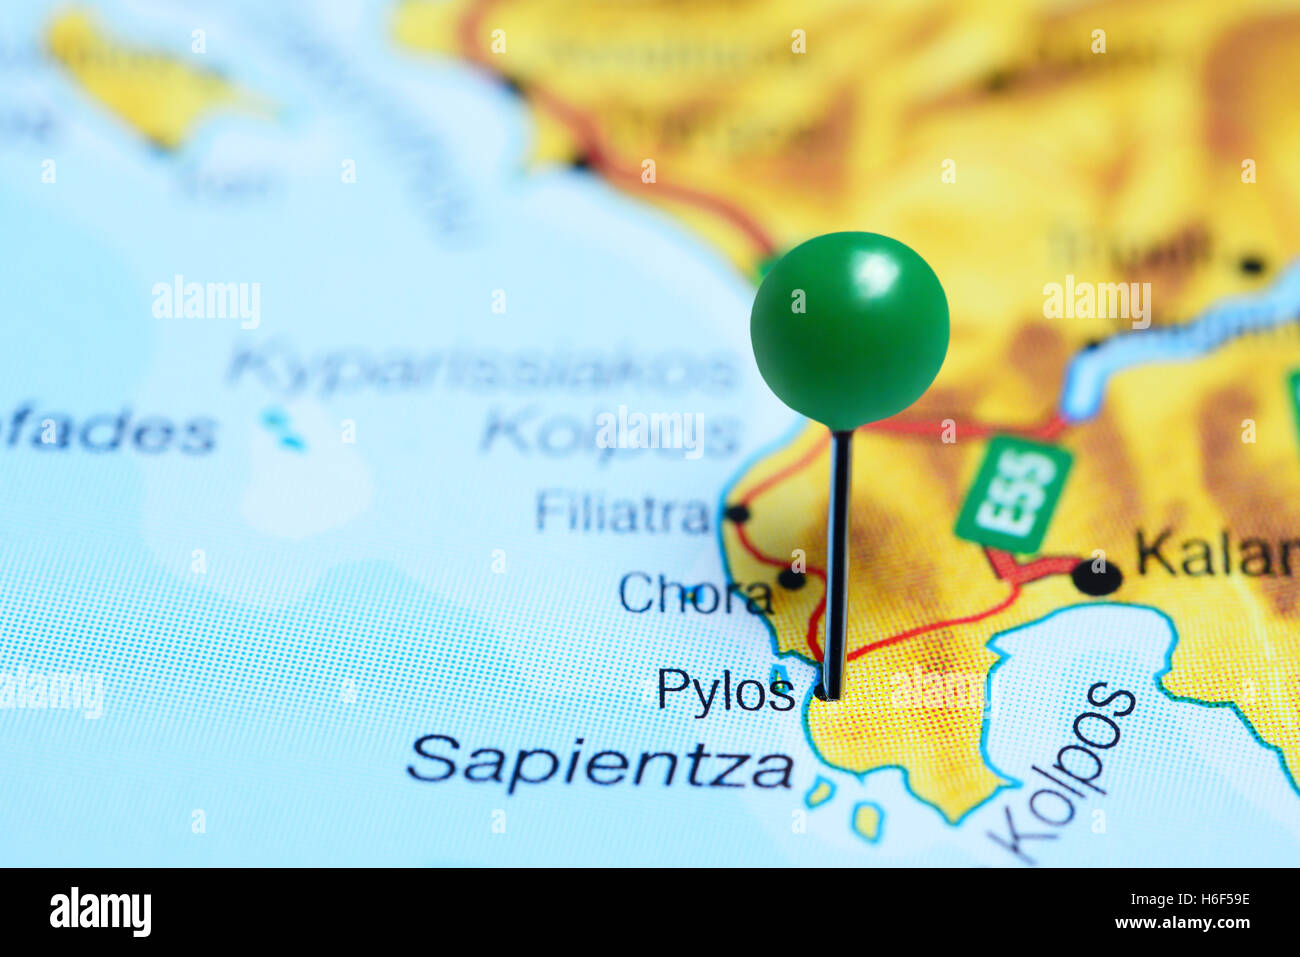 Pylos pinned on a map of Greece Stock Photo